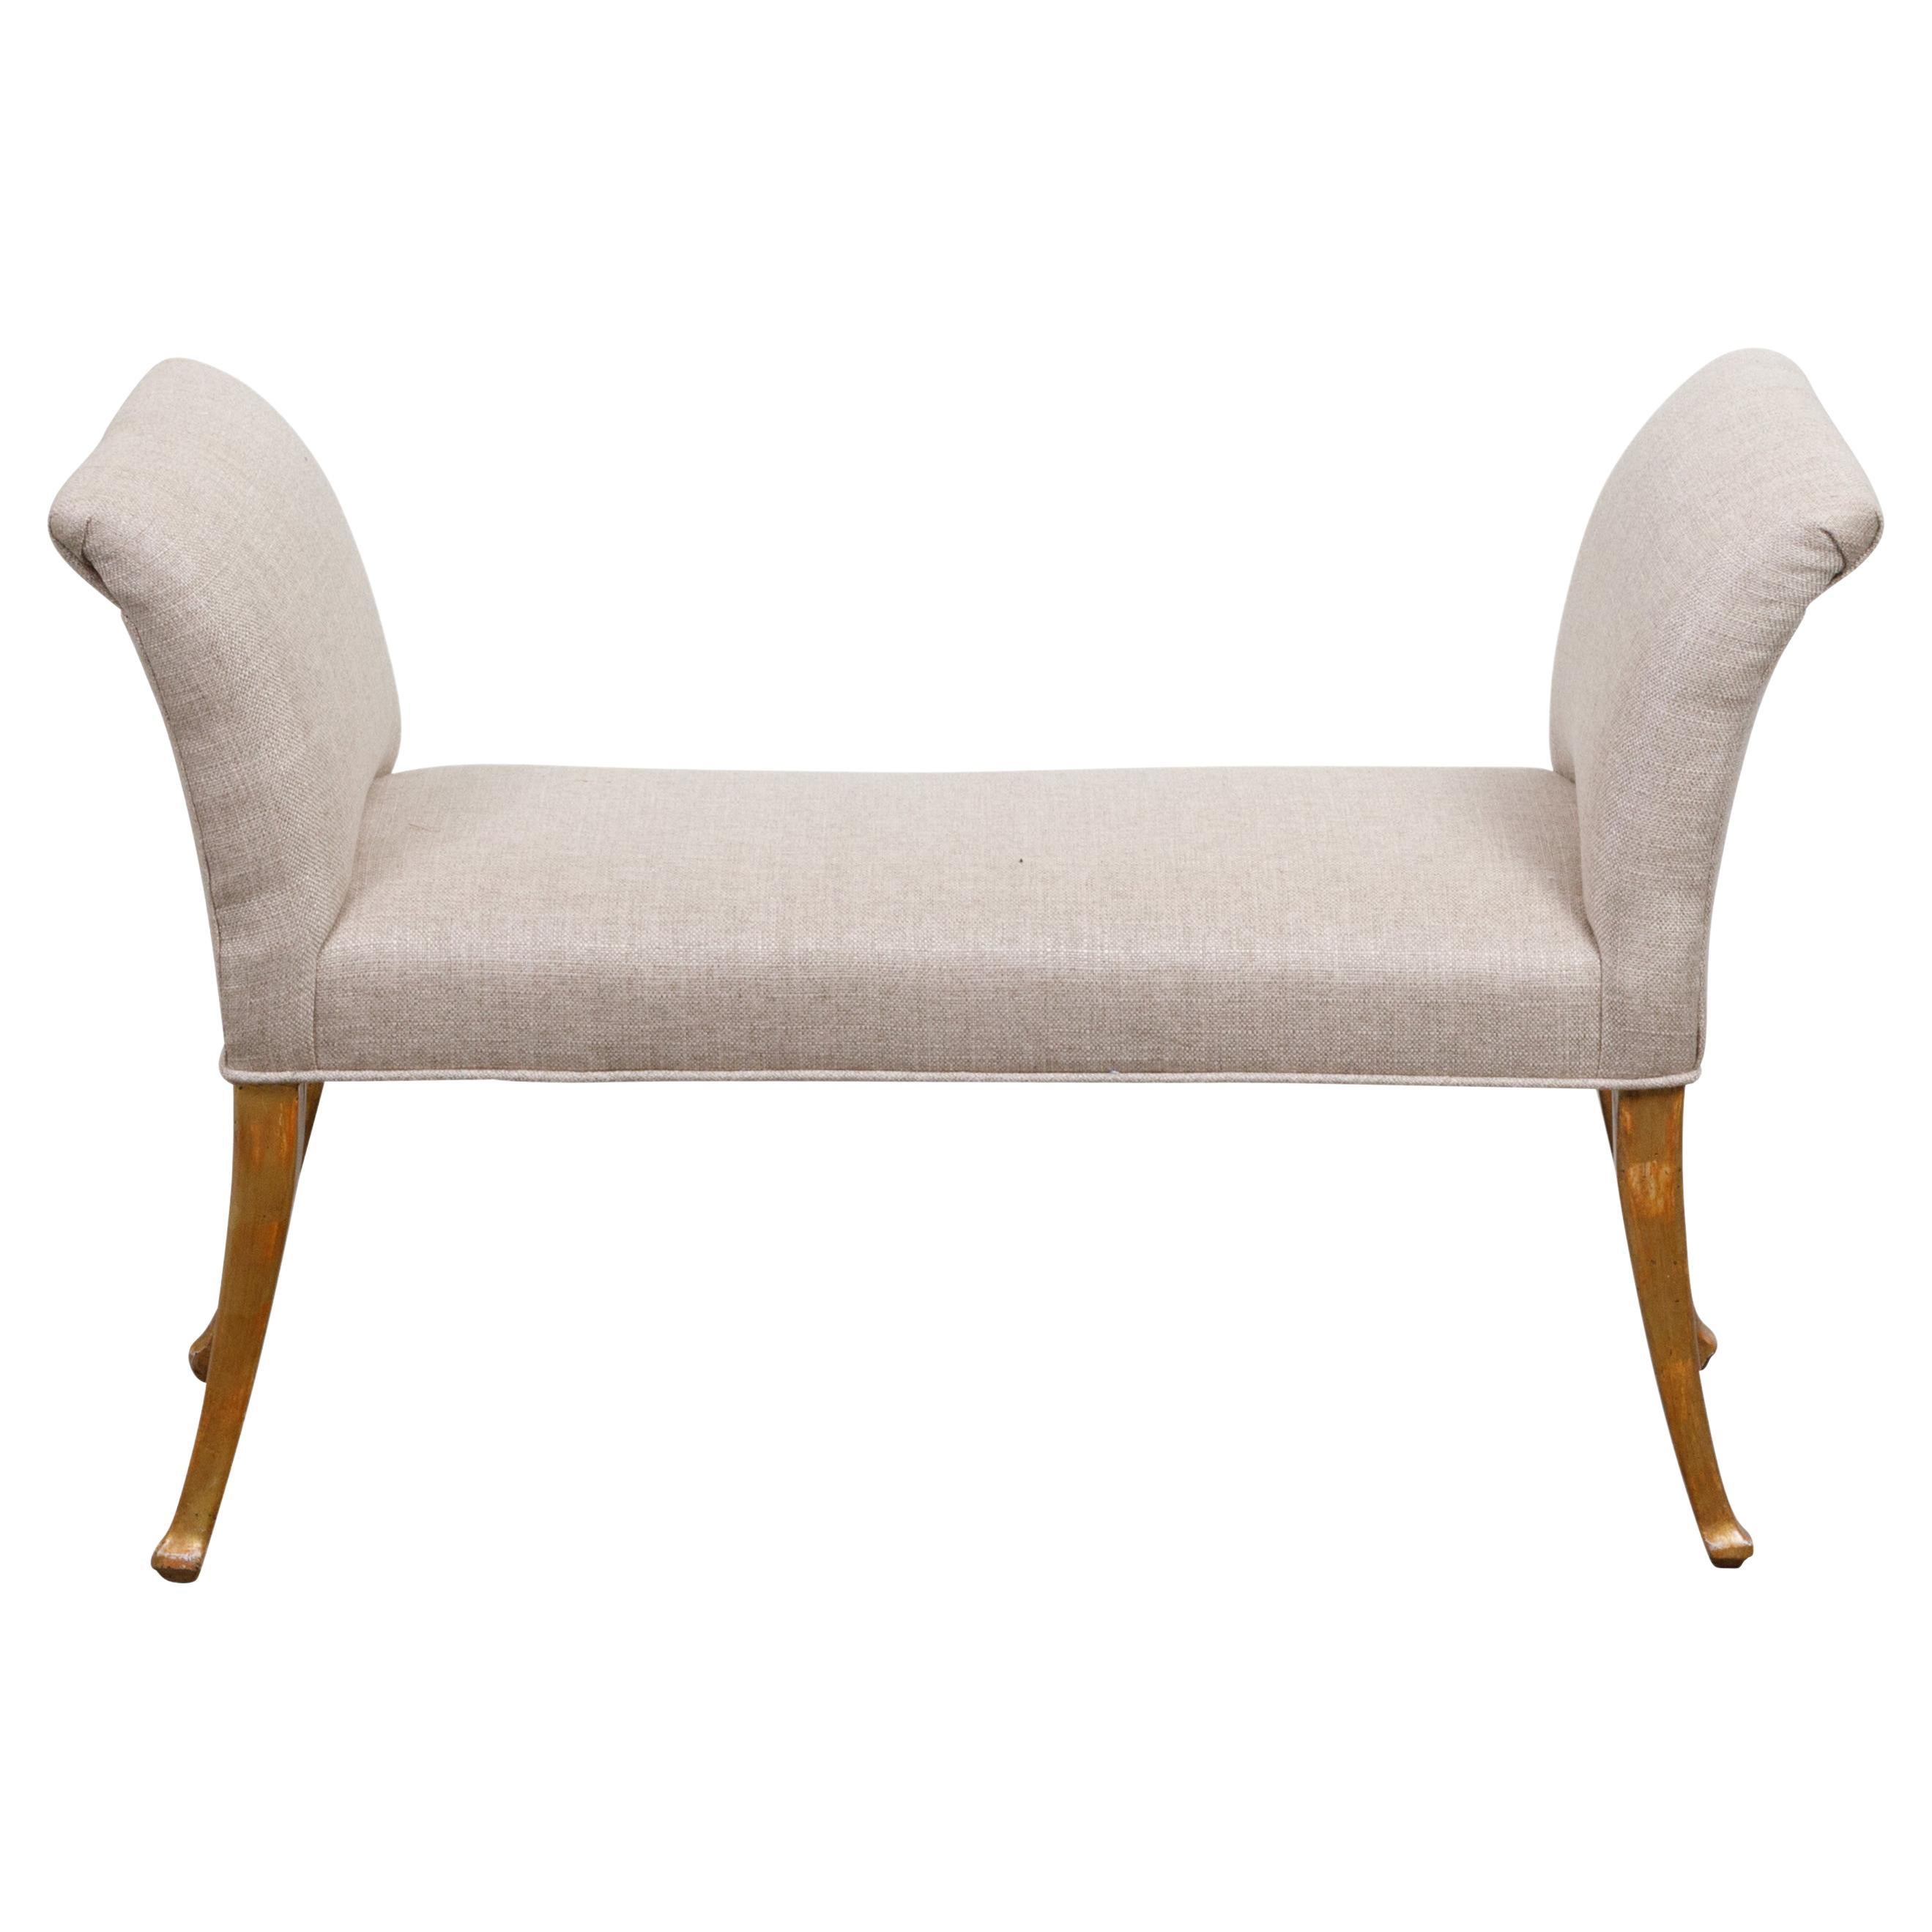 French Mid-Century Giltwood Bench with Saber Legs and New Upholstery For Sale